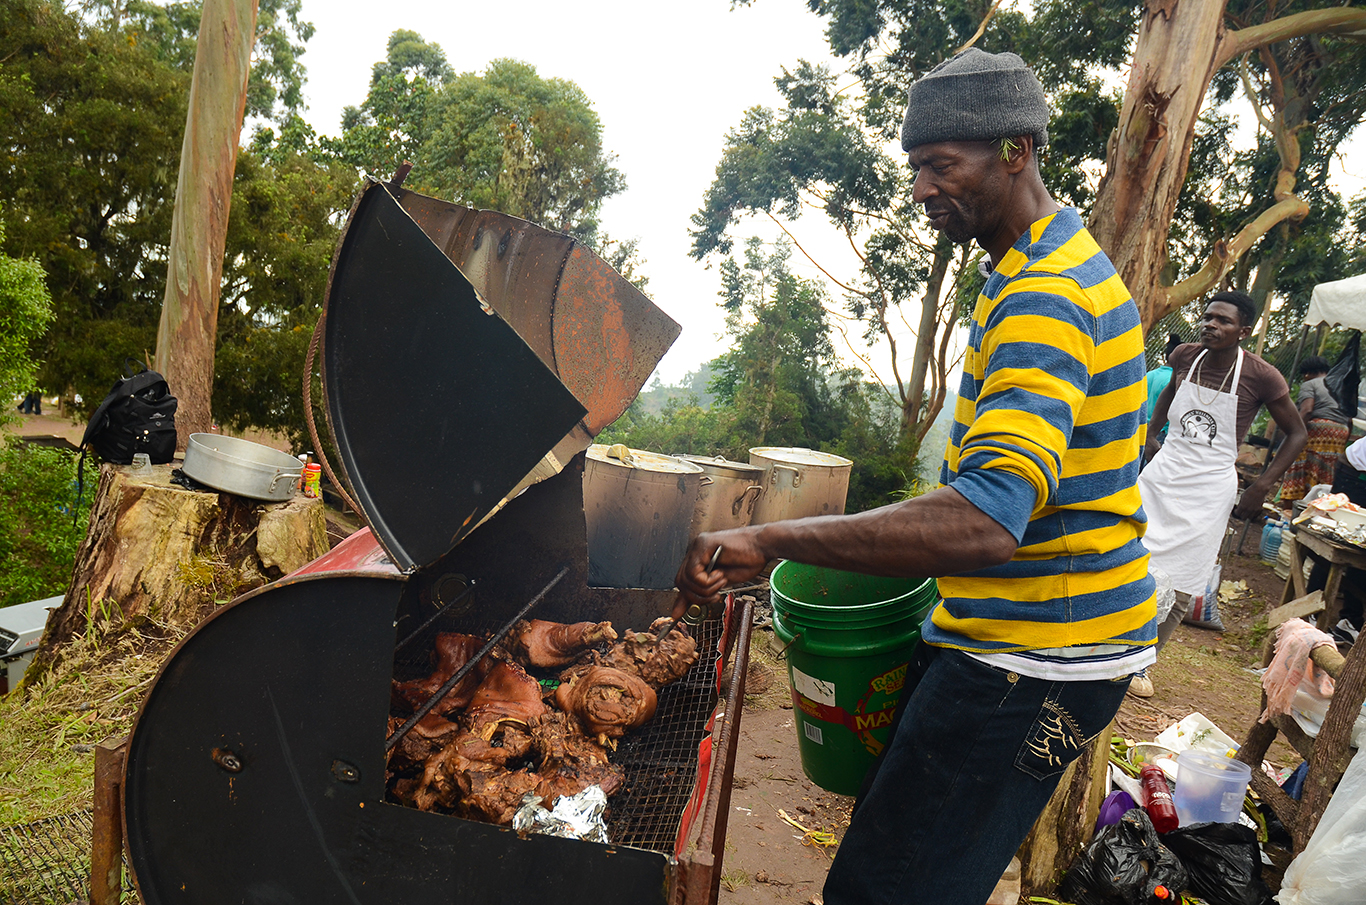 Everton Grant preparing his signature Jerk Pork at the Blue and John Crow Mountains National Park 25th Anniversary Event - Spympony in the Mountains held at Holywell on Sunday, 25th February, 2018. [Photographer: Shorn Hector